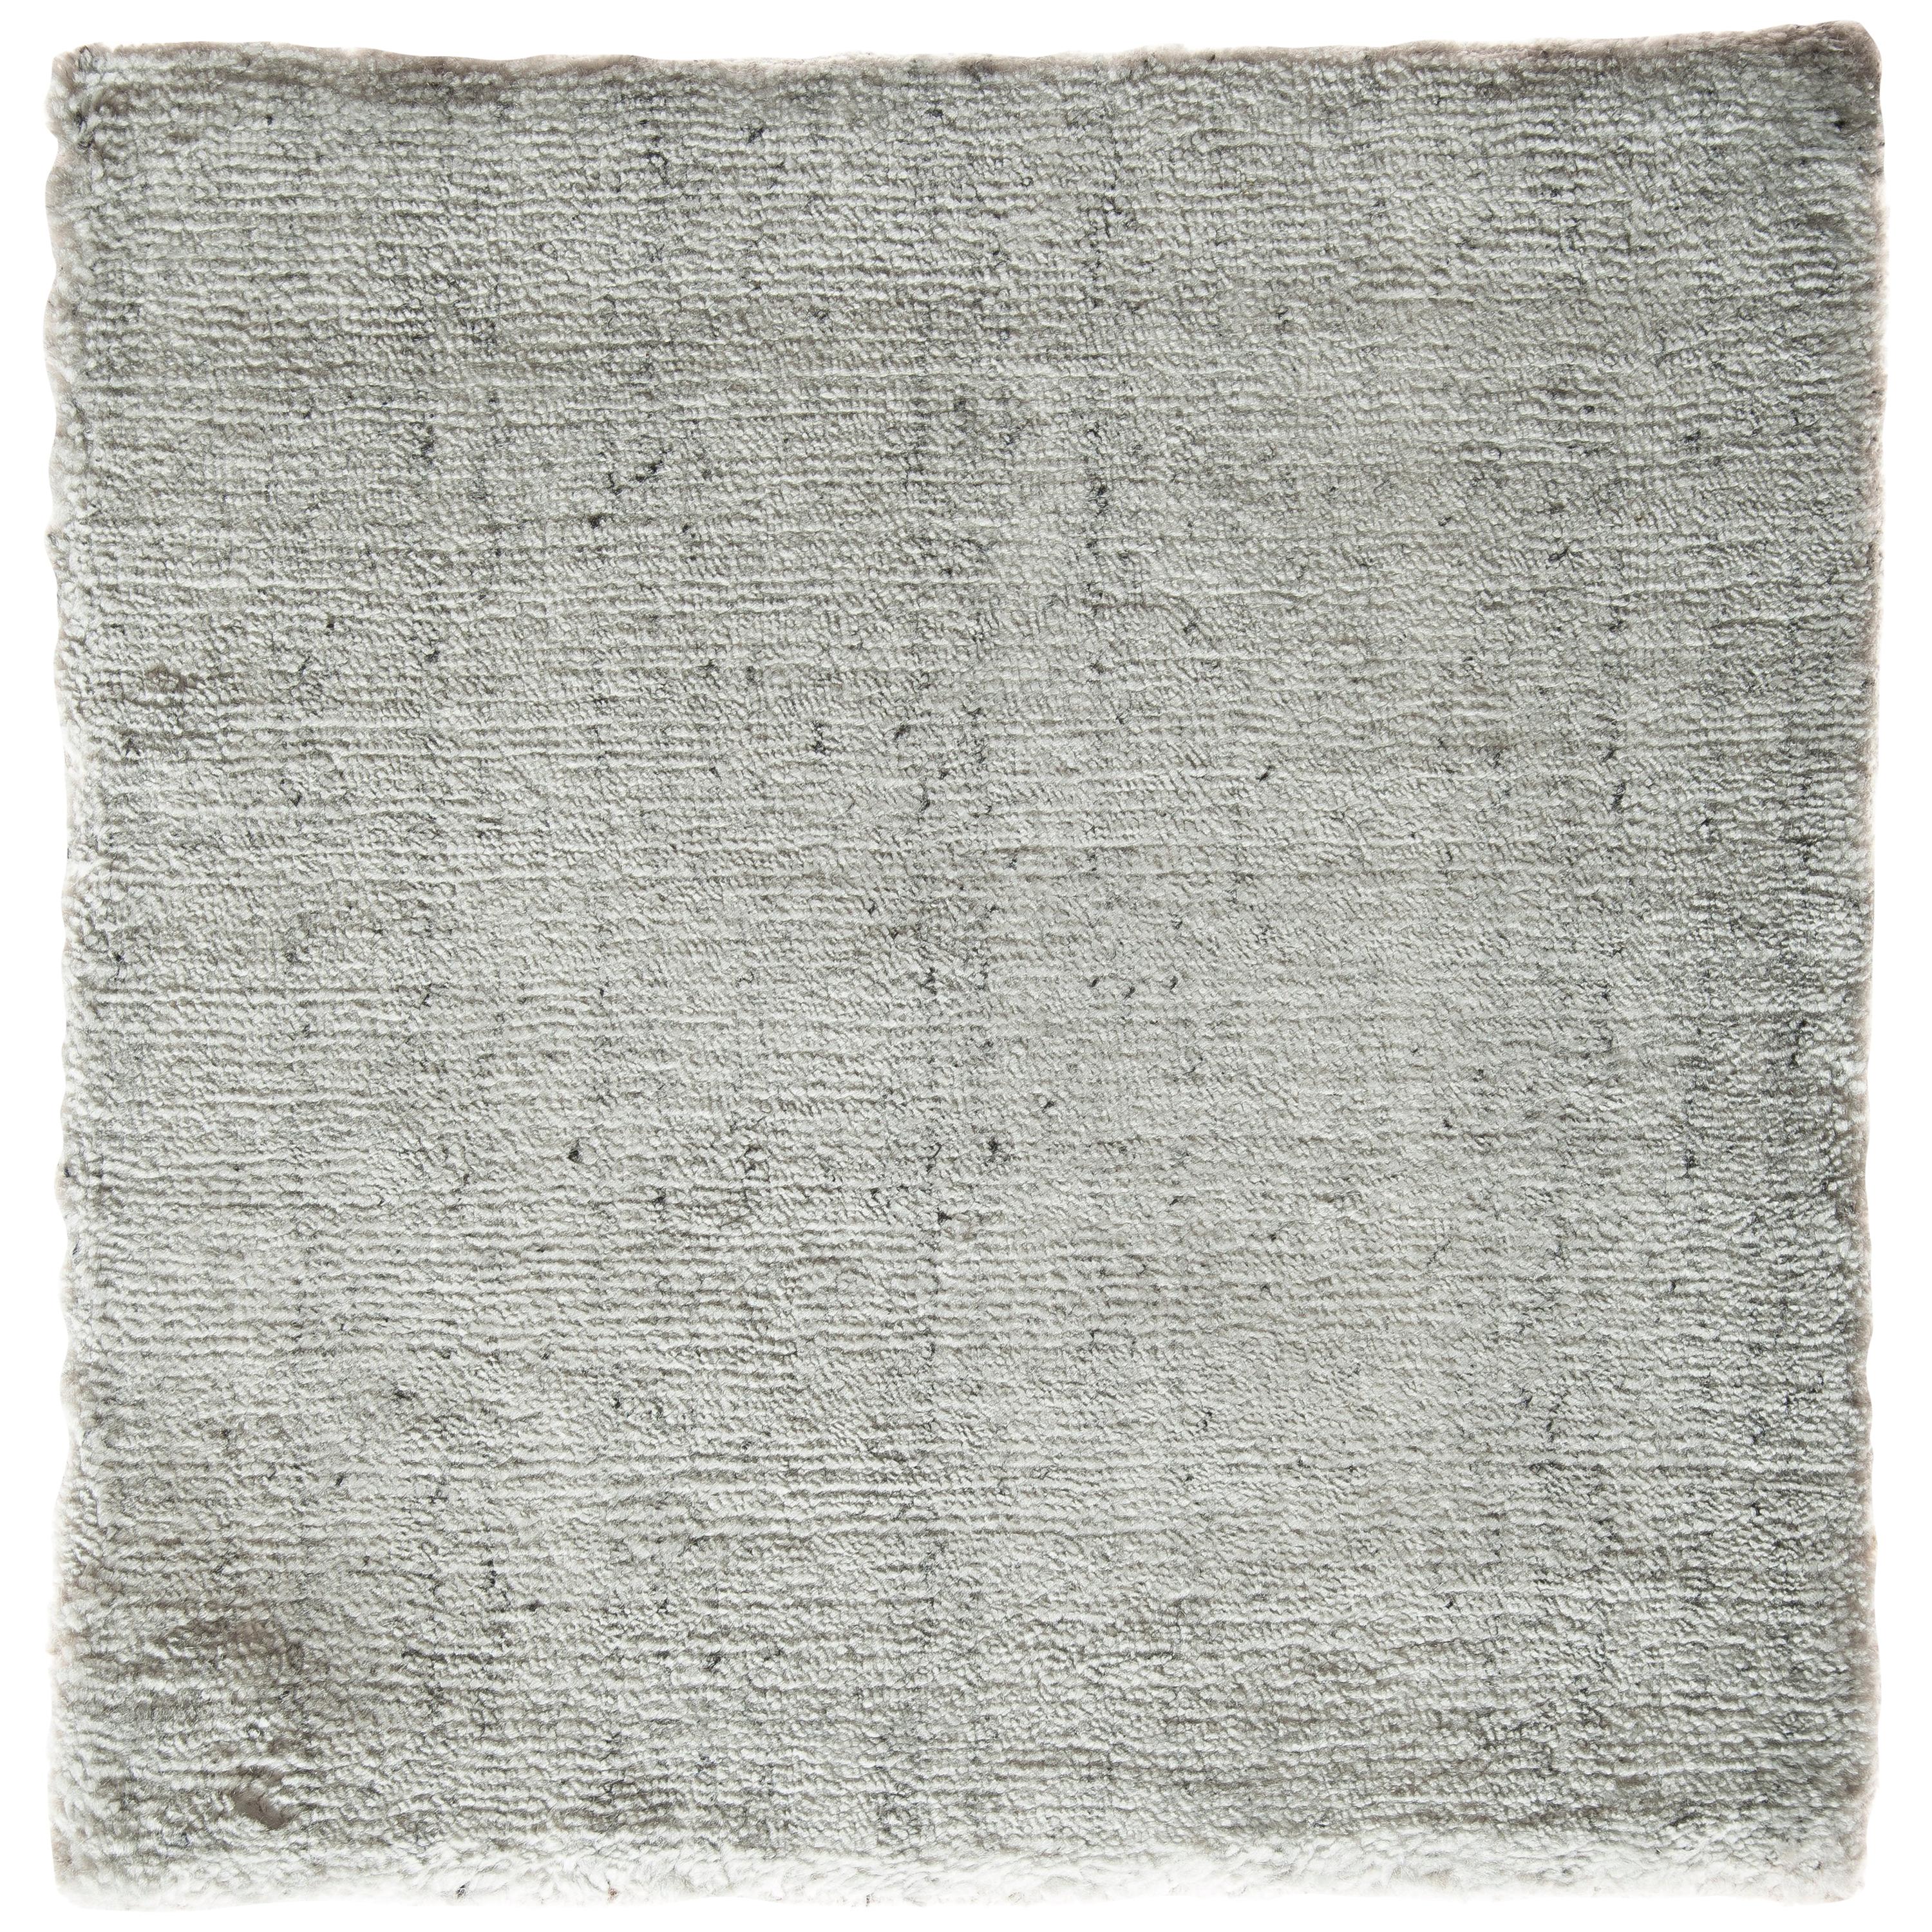 White and Silver Speckled Bamboo Silk Solid Hand-loomed Contemporary Tonal Rug 